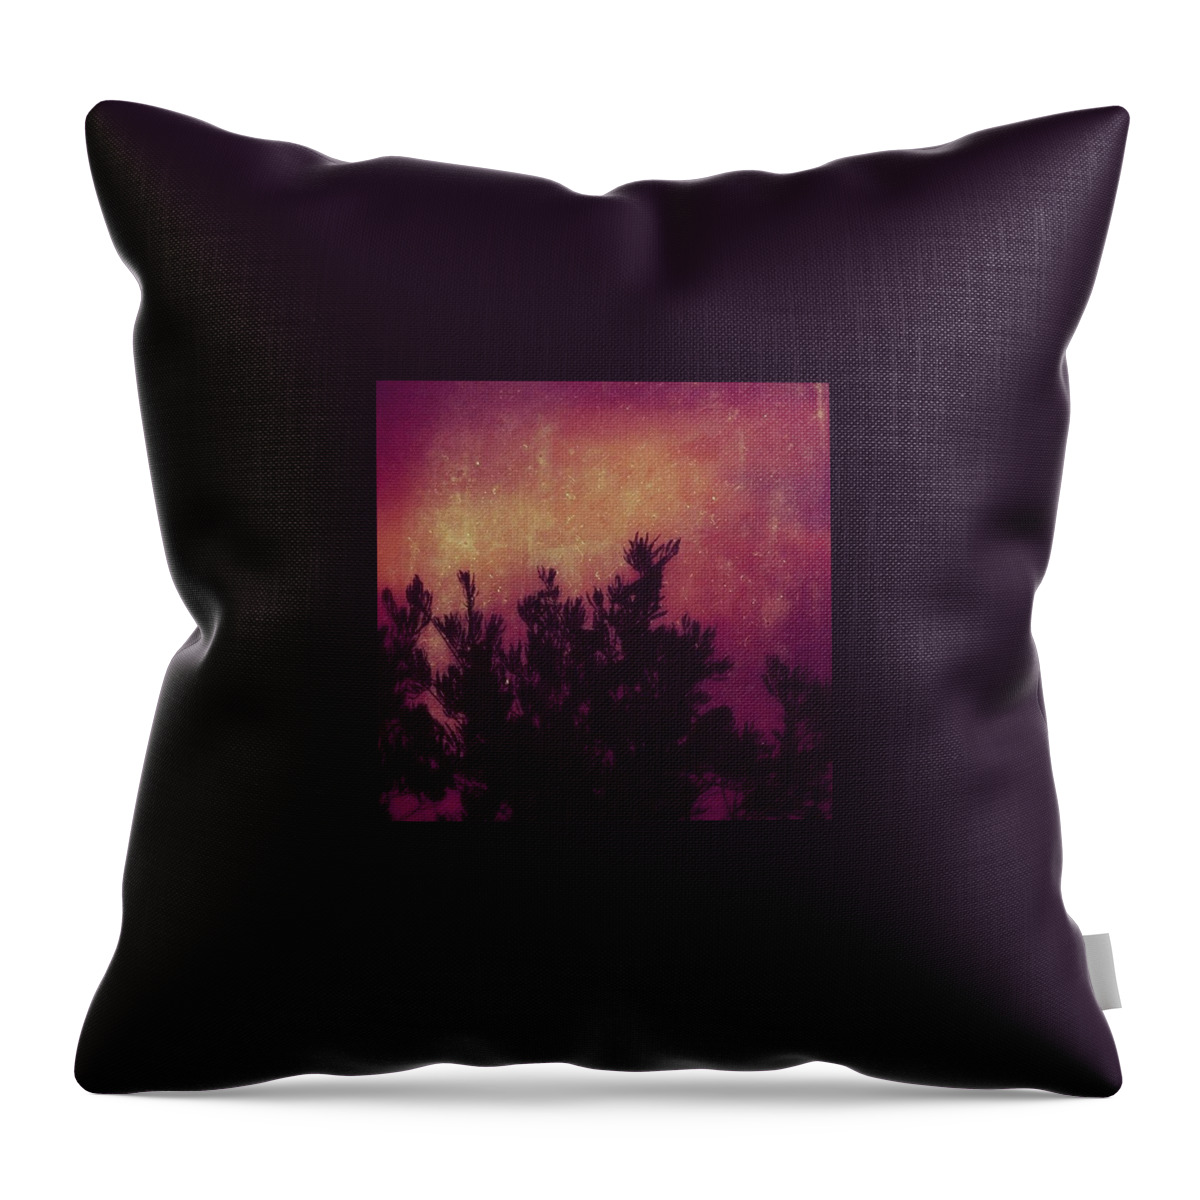 Beauty_of_light Throw Pillow featuring the photograph Shadows by Yemen Yemen